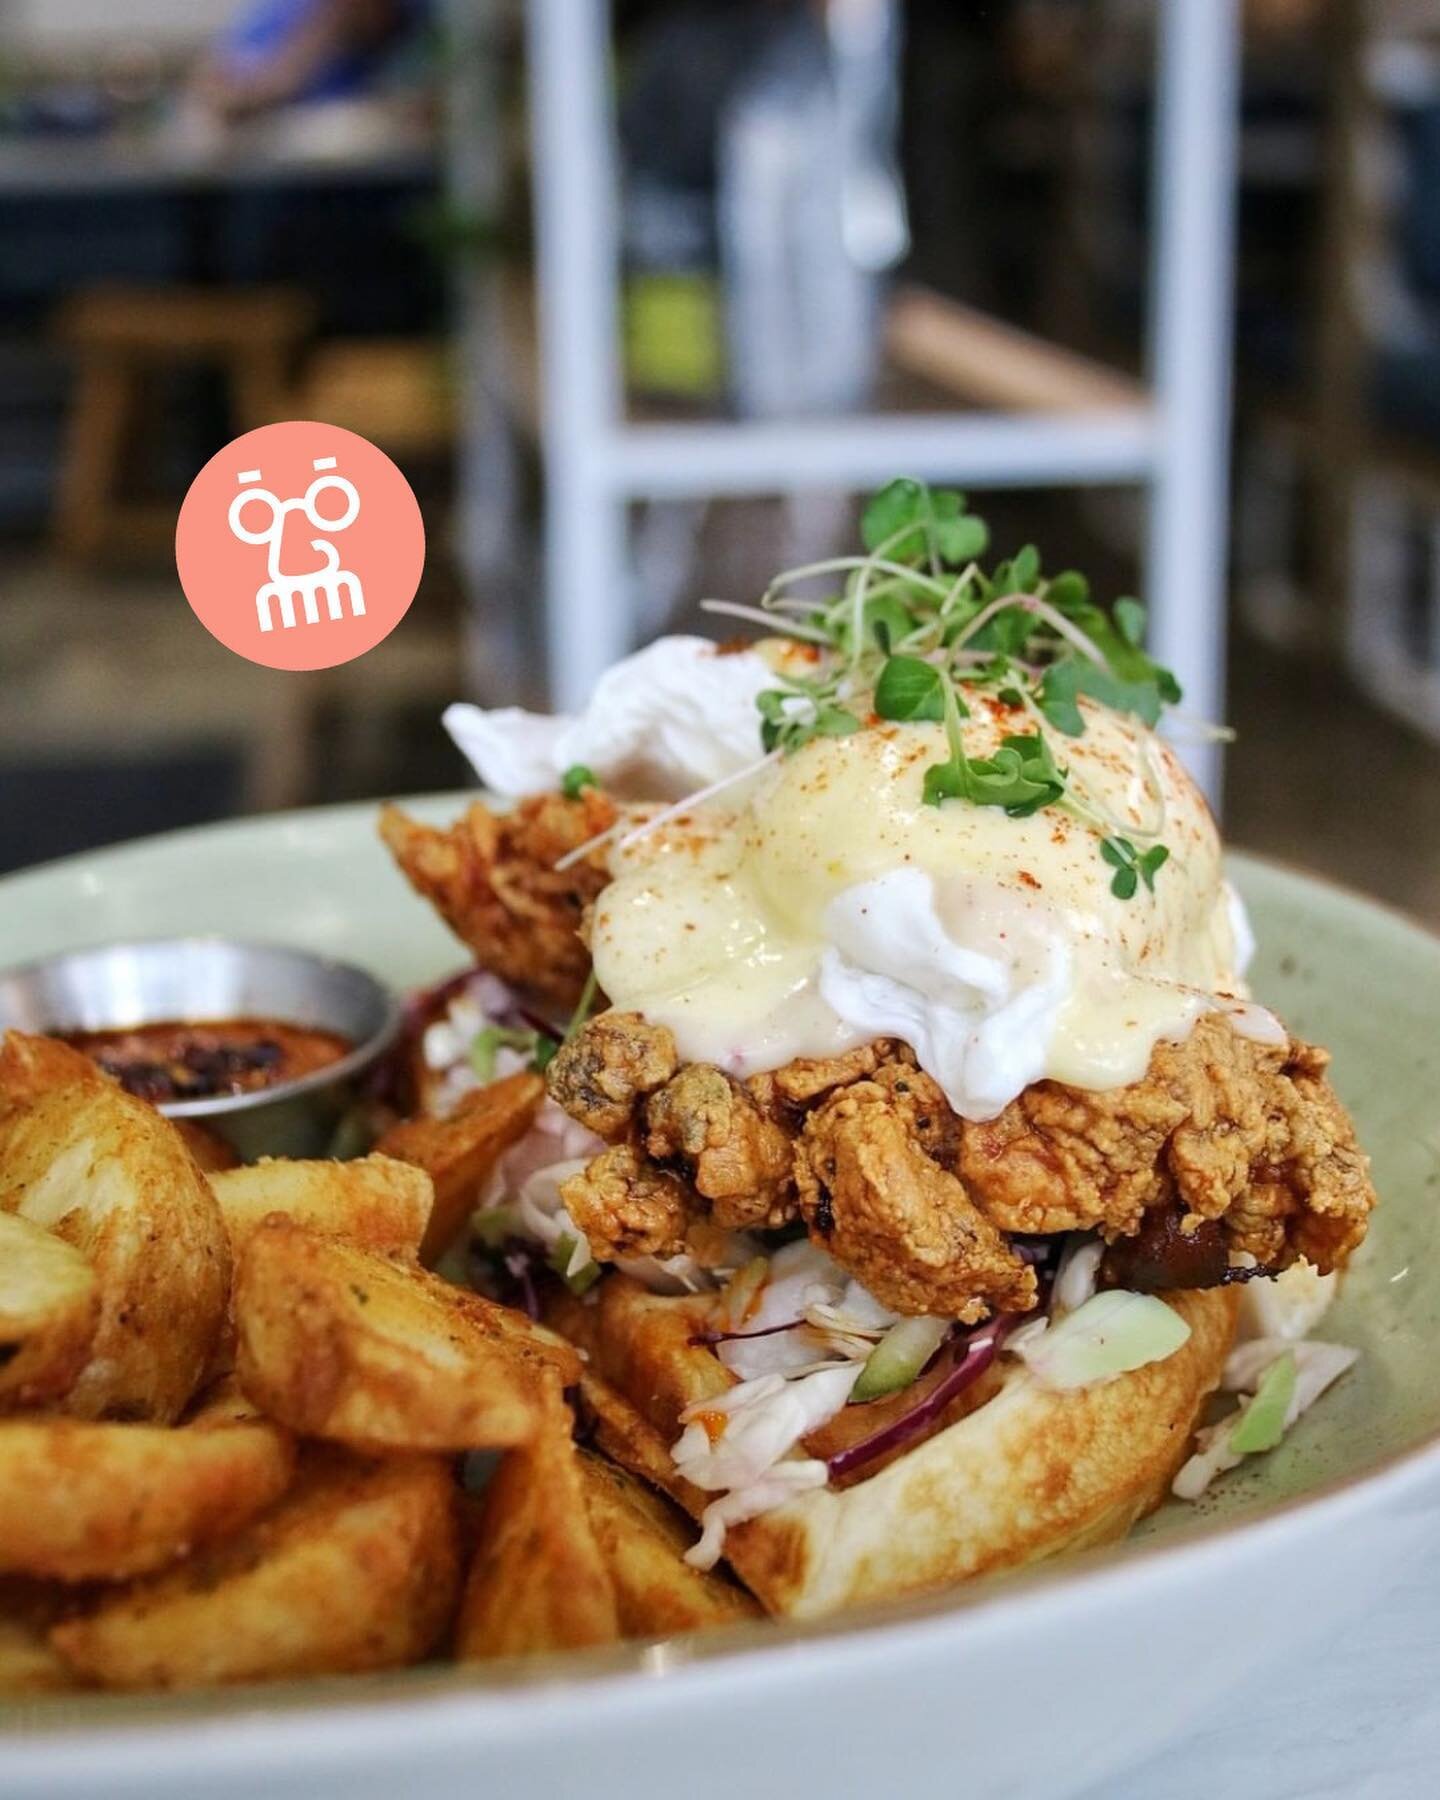 Eggs Bennie for brunch? Groundbreaking. 
⠀⠀⠀⠀⠀⠀⠀⠀⠀
Fried Chicken and Waffle Bennie, with spicy fried chicken, chicken gravy, pickle slaw, poached eggs and brown butter hollandaise.
⠀⠀⠀⠀⠀⠀⠀⠀⠀
 #MeetMeInMarda
⚡: Order pickup or delivery online via&nbsp